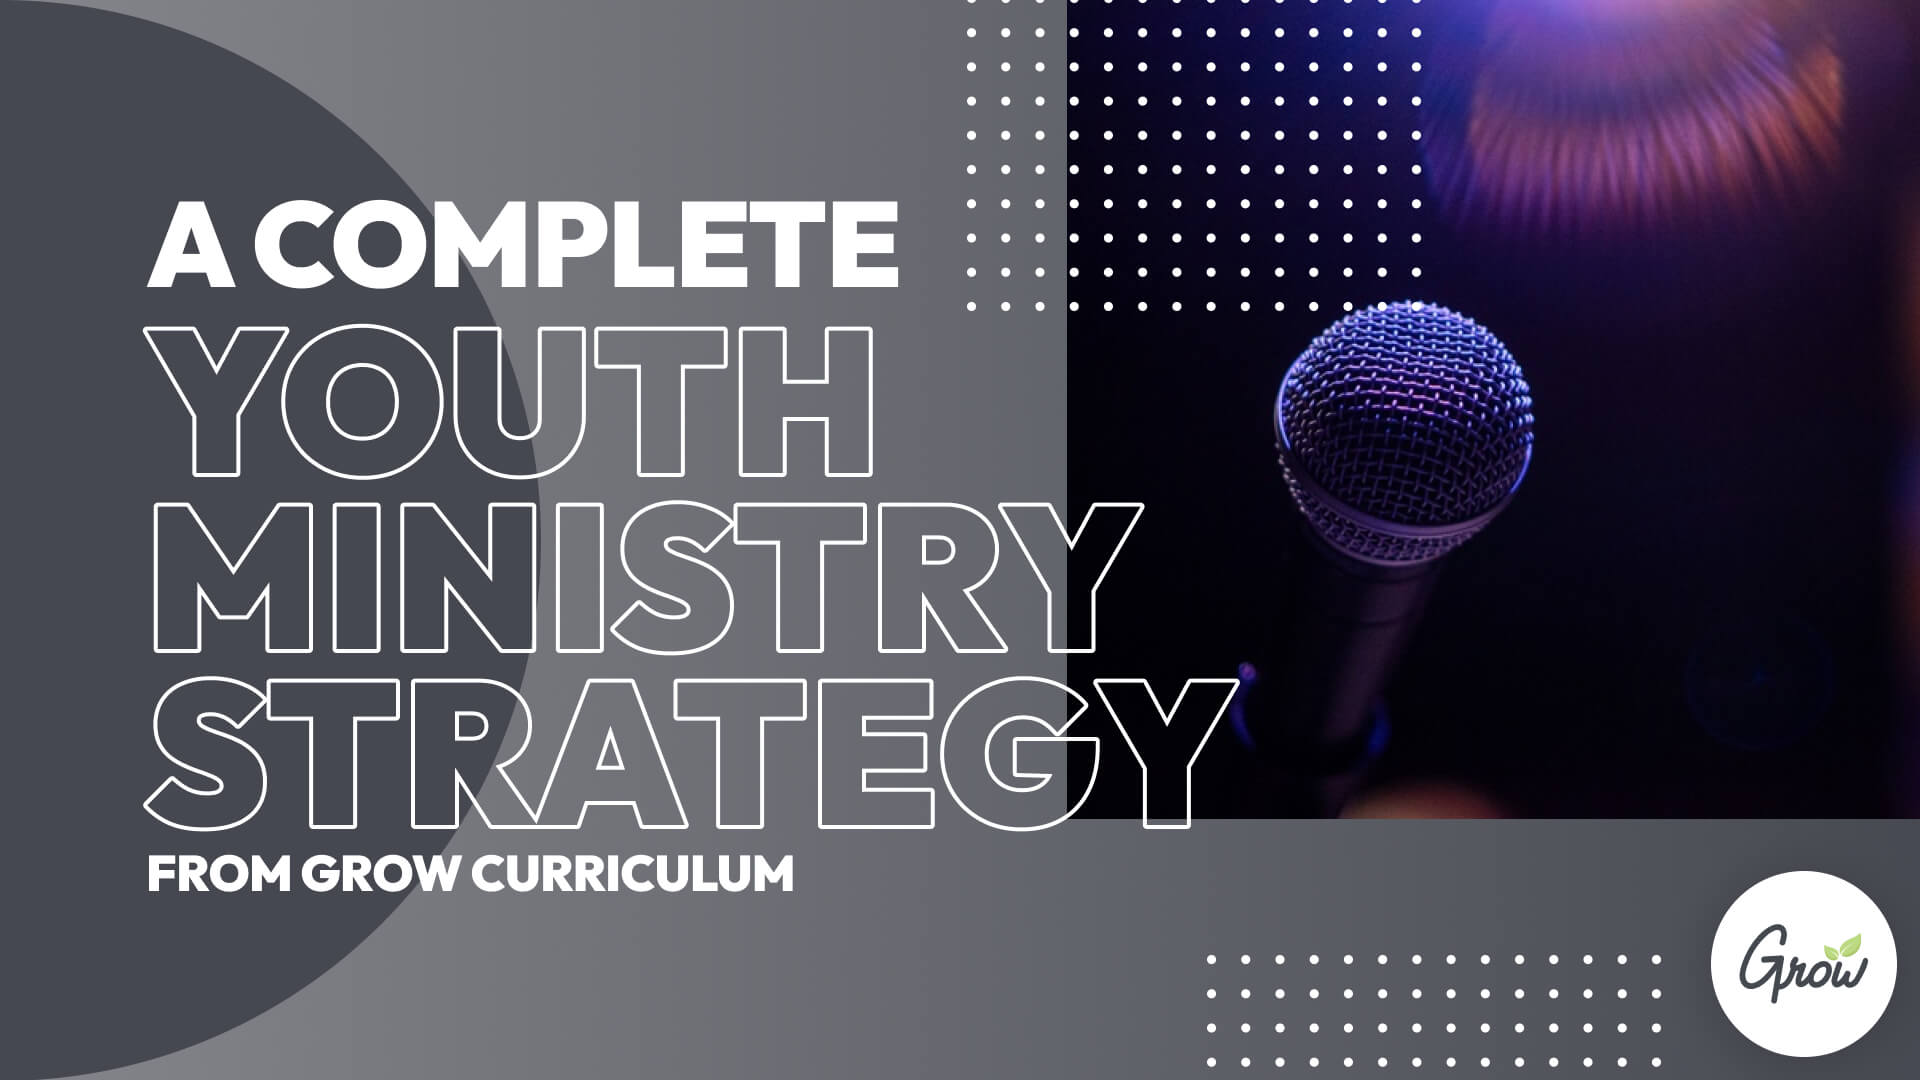 A Complete Youth Ministry Strategy from Grow Curriculum